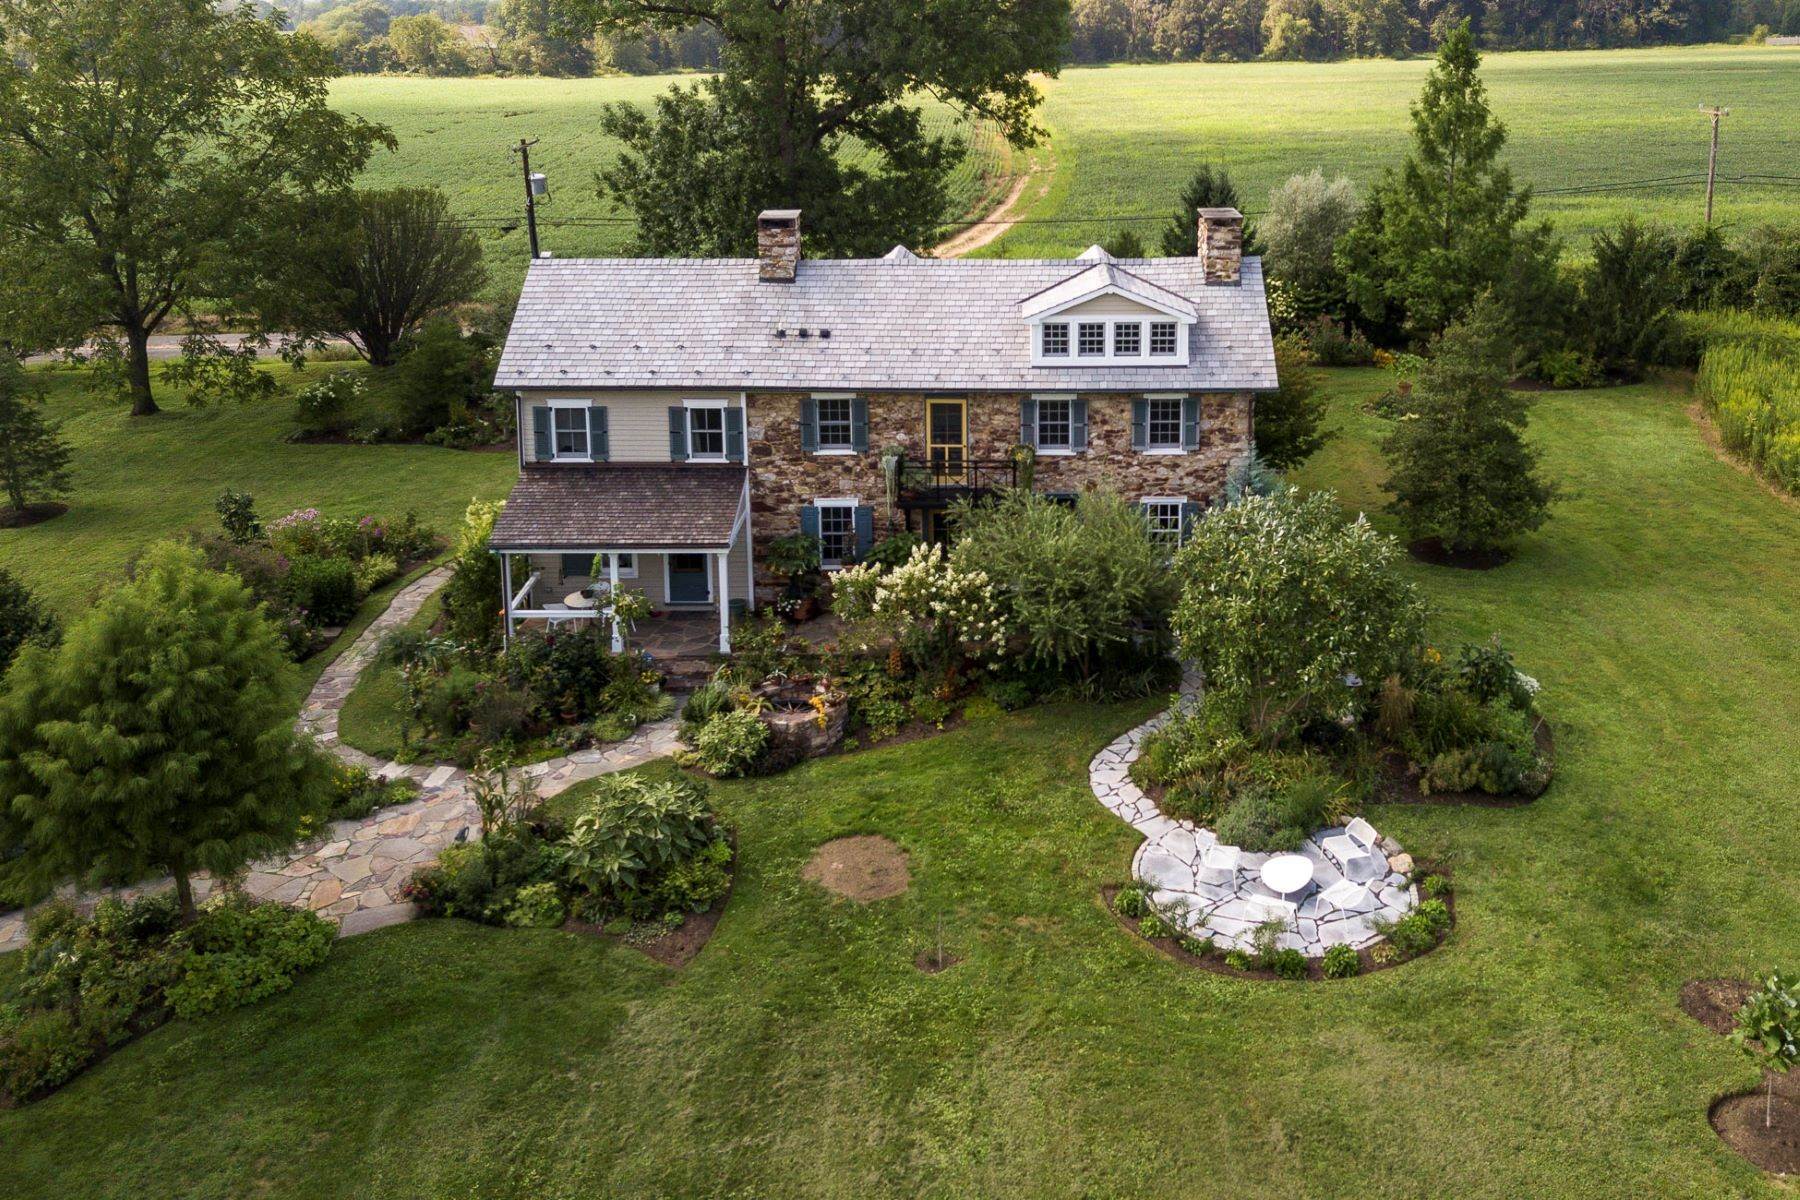 Property for Sale at Turn-Key Property Filled with Bucks County Flavor 4321 New Hope Road, Furlong, Pennsylvania 18925 United States